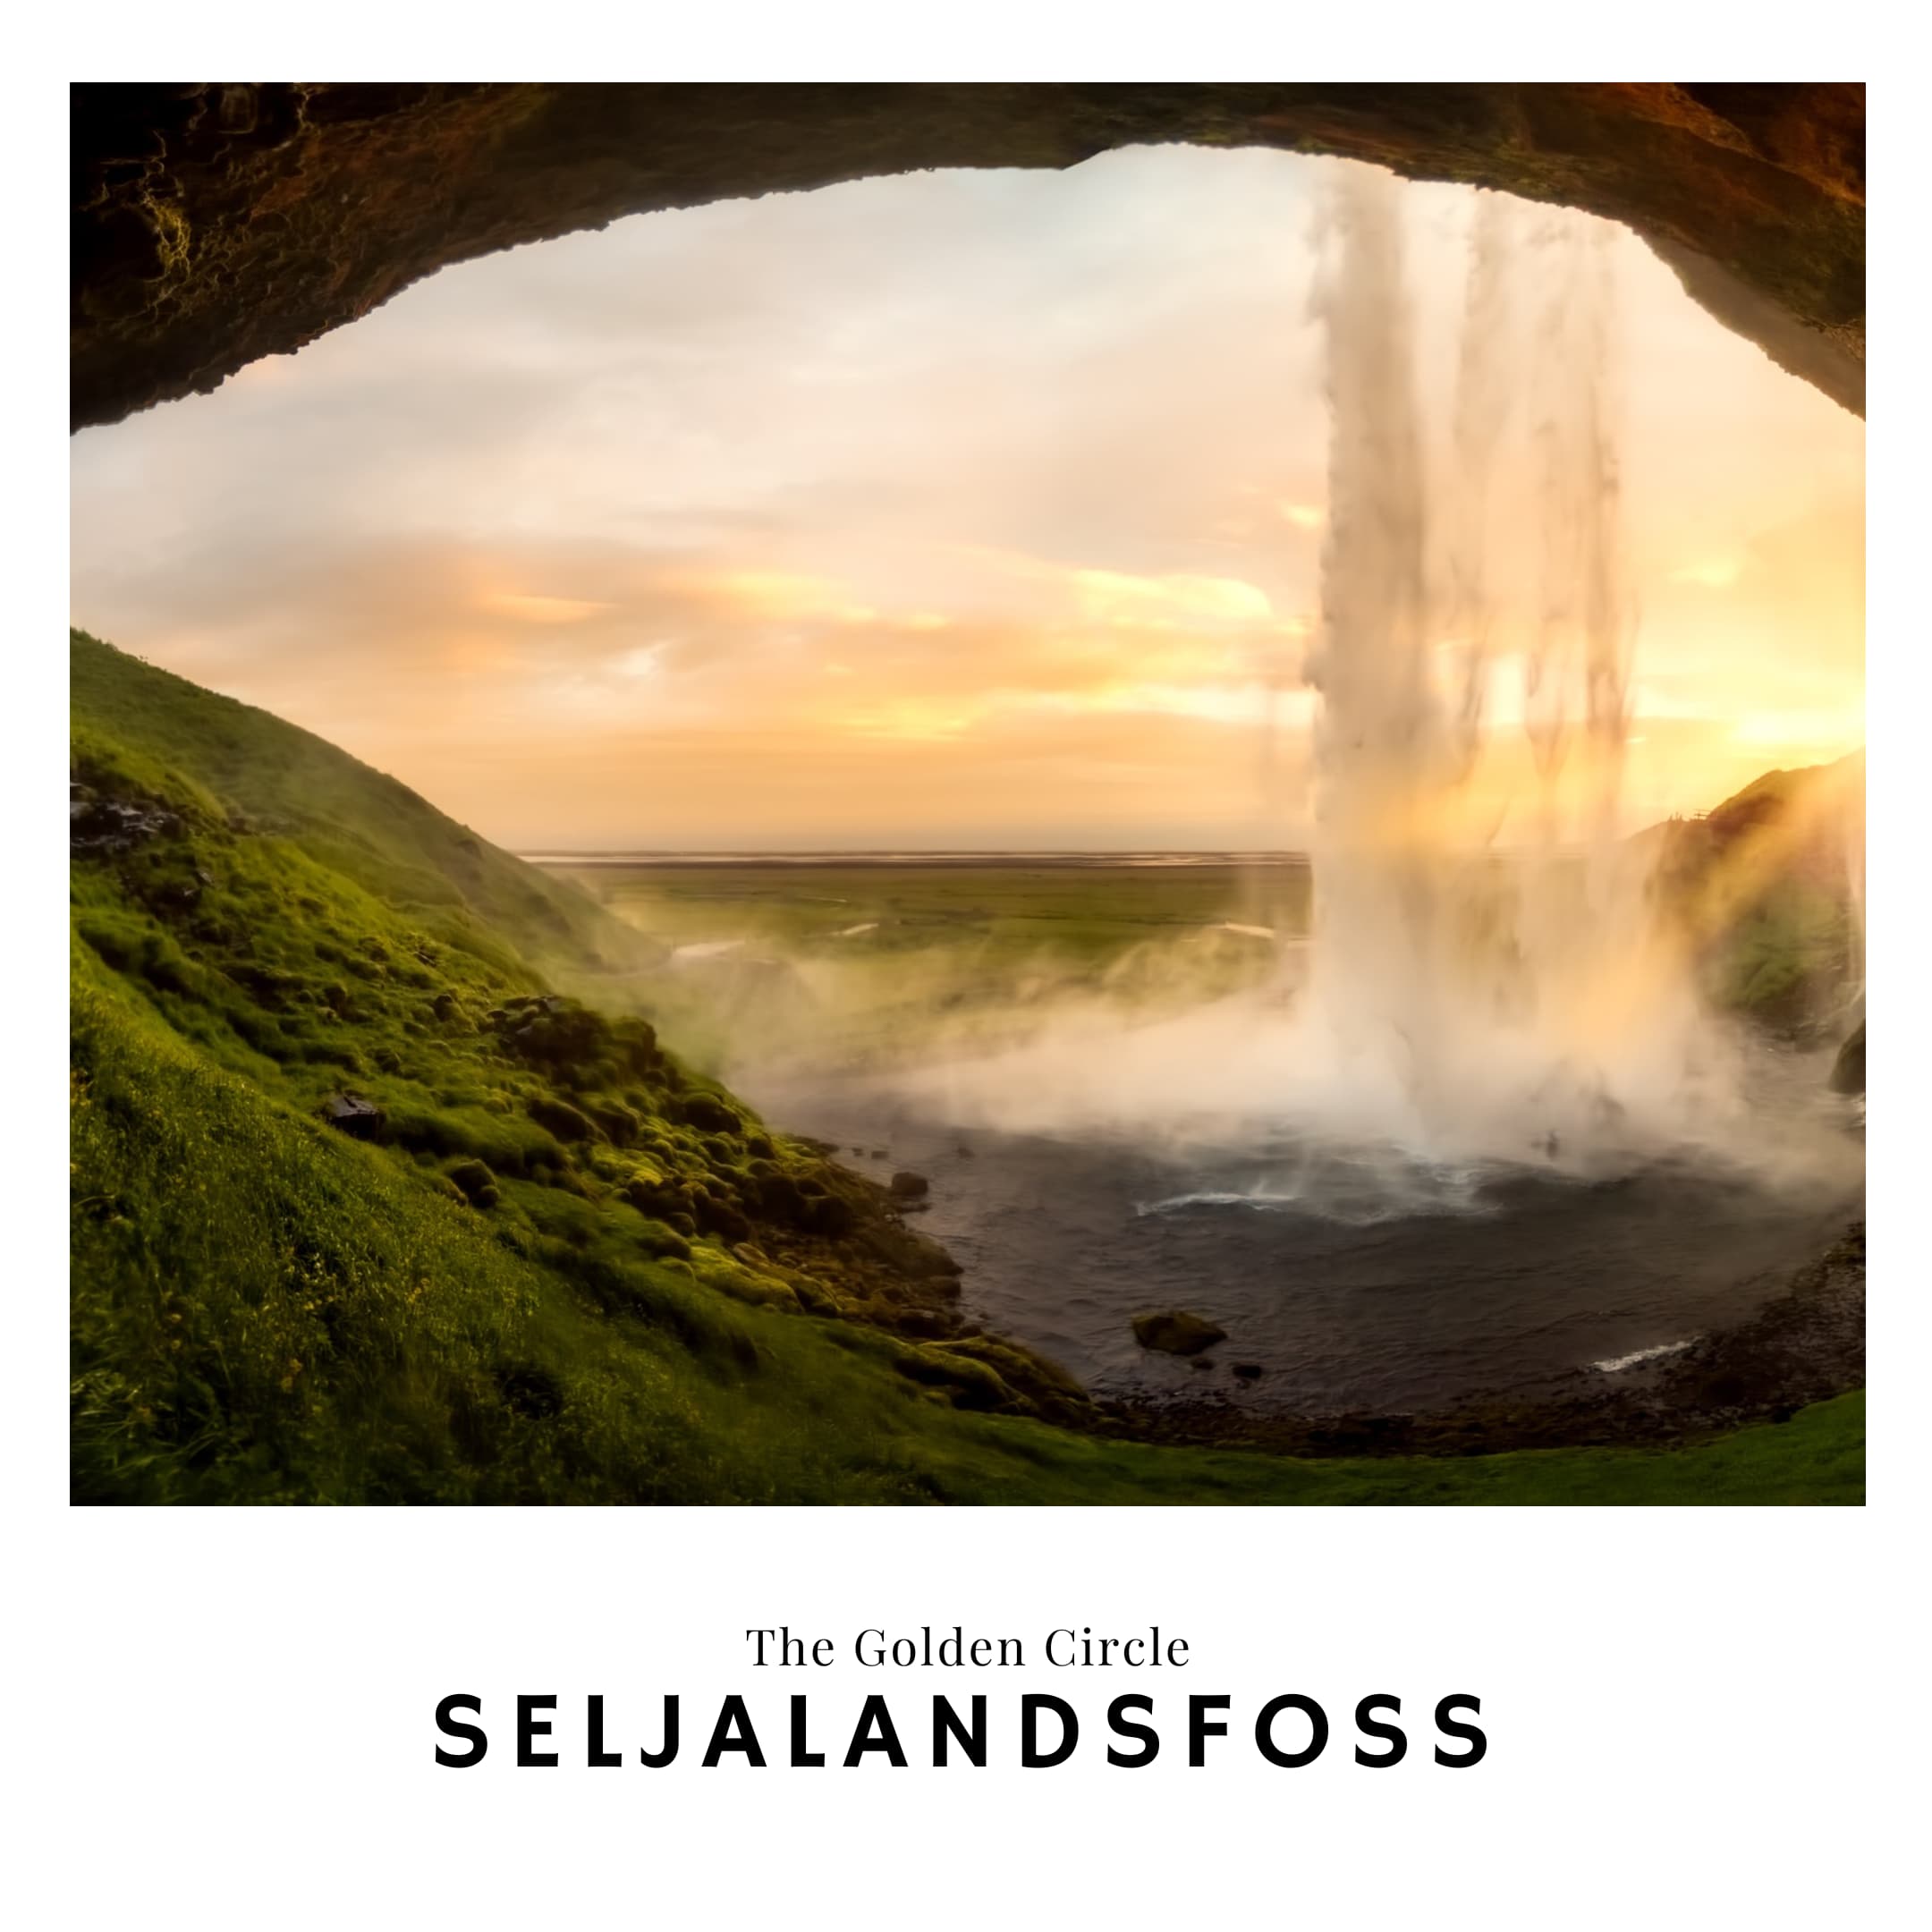 Link to the Seljalandsfoss Travel Guide on Iceland Golden Circle